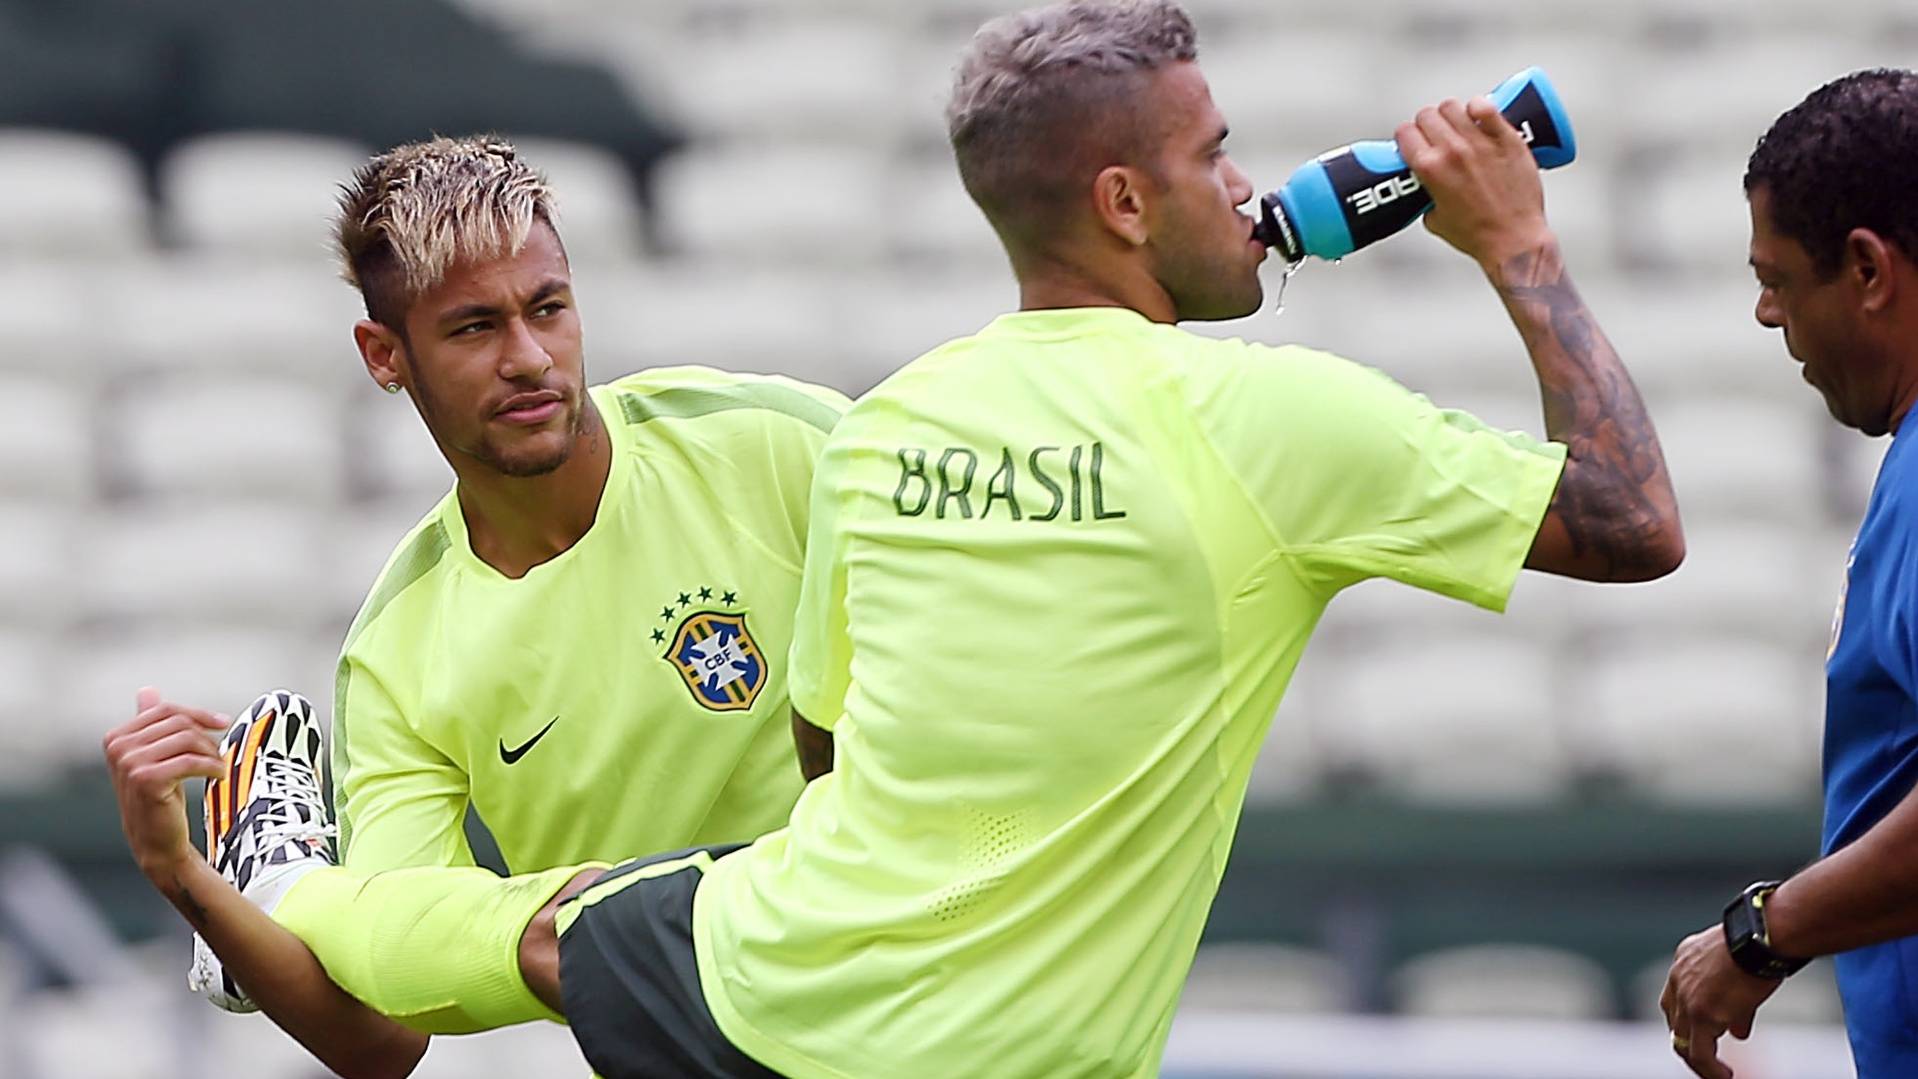 Daniel Alves and Neymar in a training with Brazil in 2016